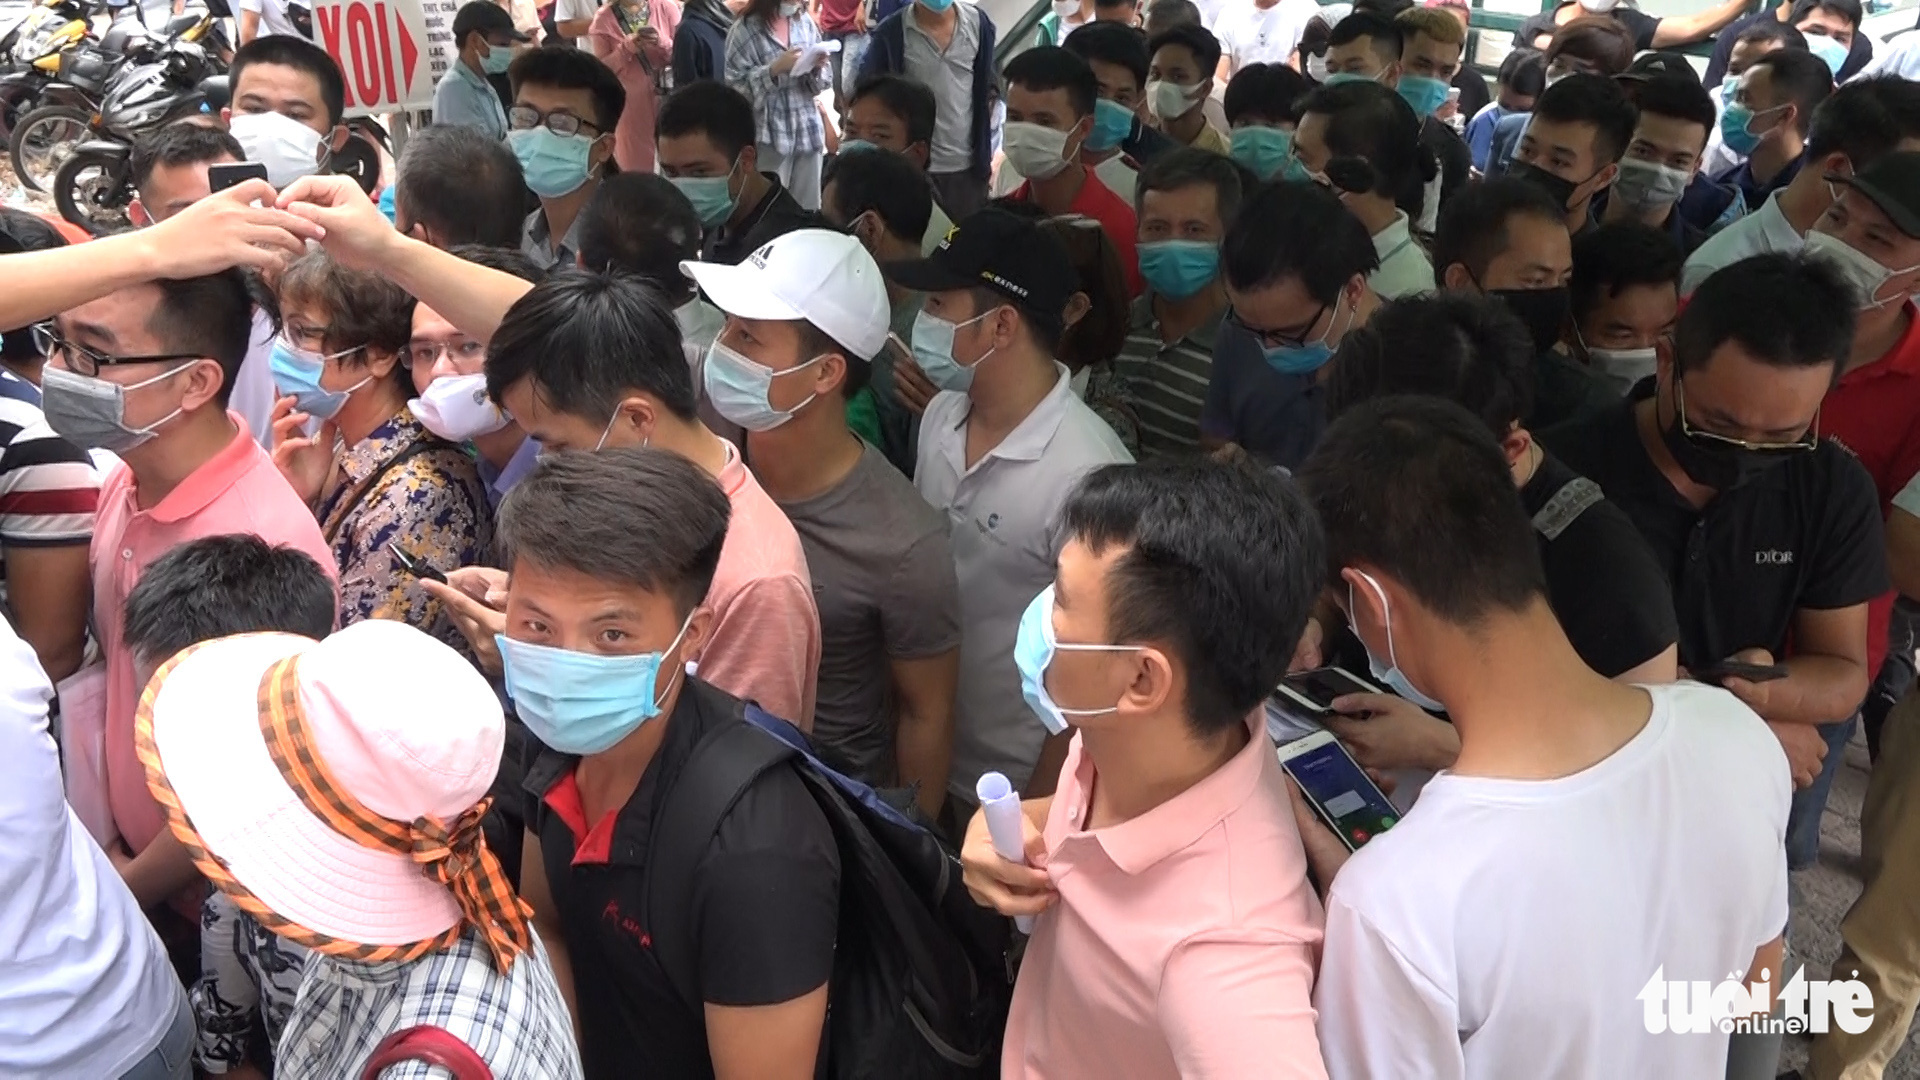 People pack COVID-19 test site in Hanoi despite gathering ban